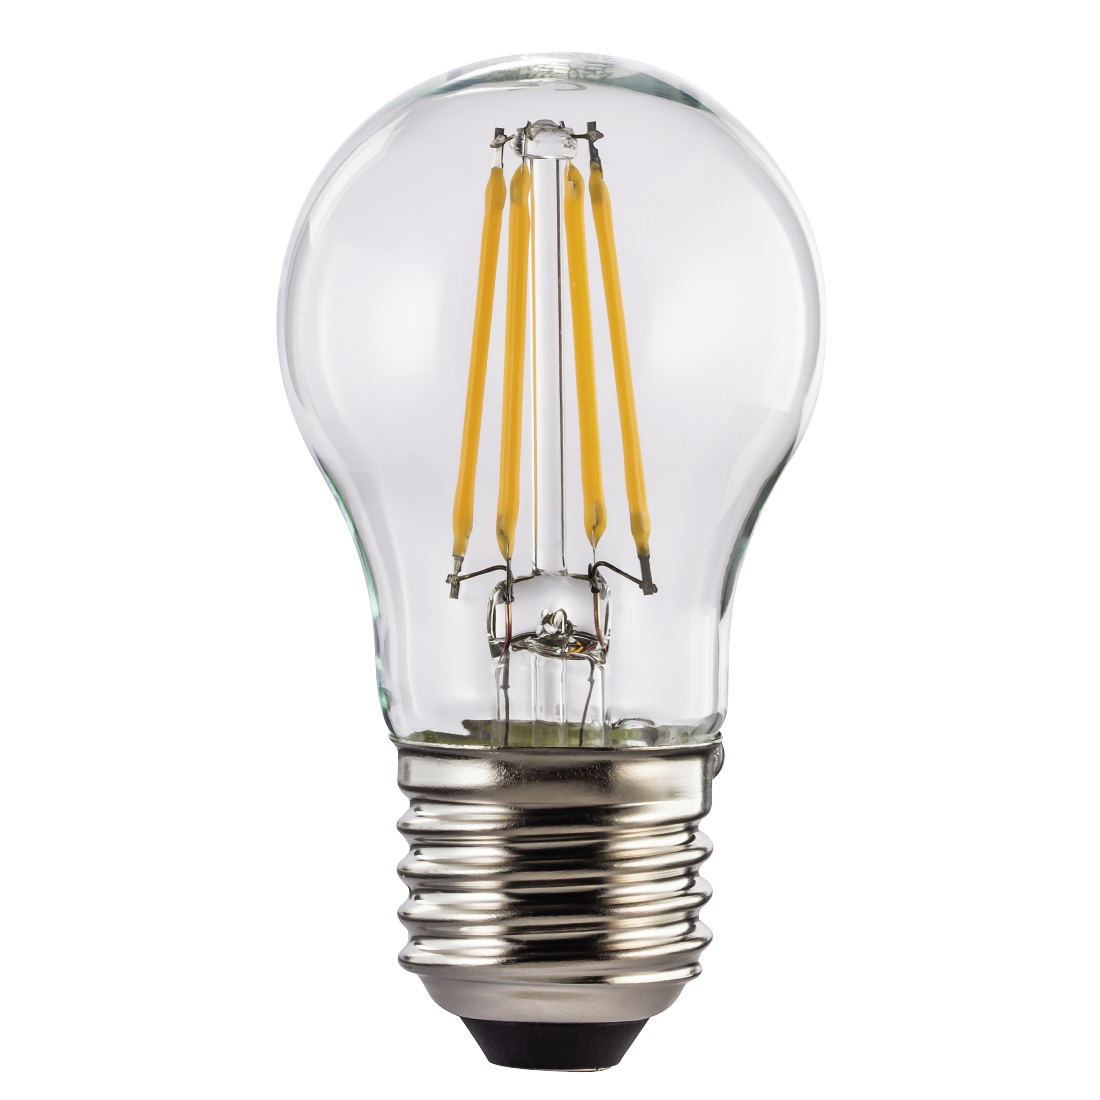 abx High-Res Image - Xavax, LED Filament, E27, 470lm replaces 40W, drop bulb, warm white